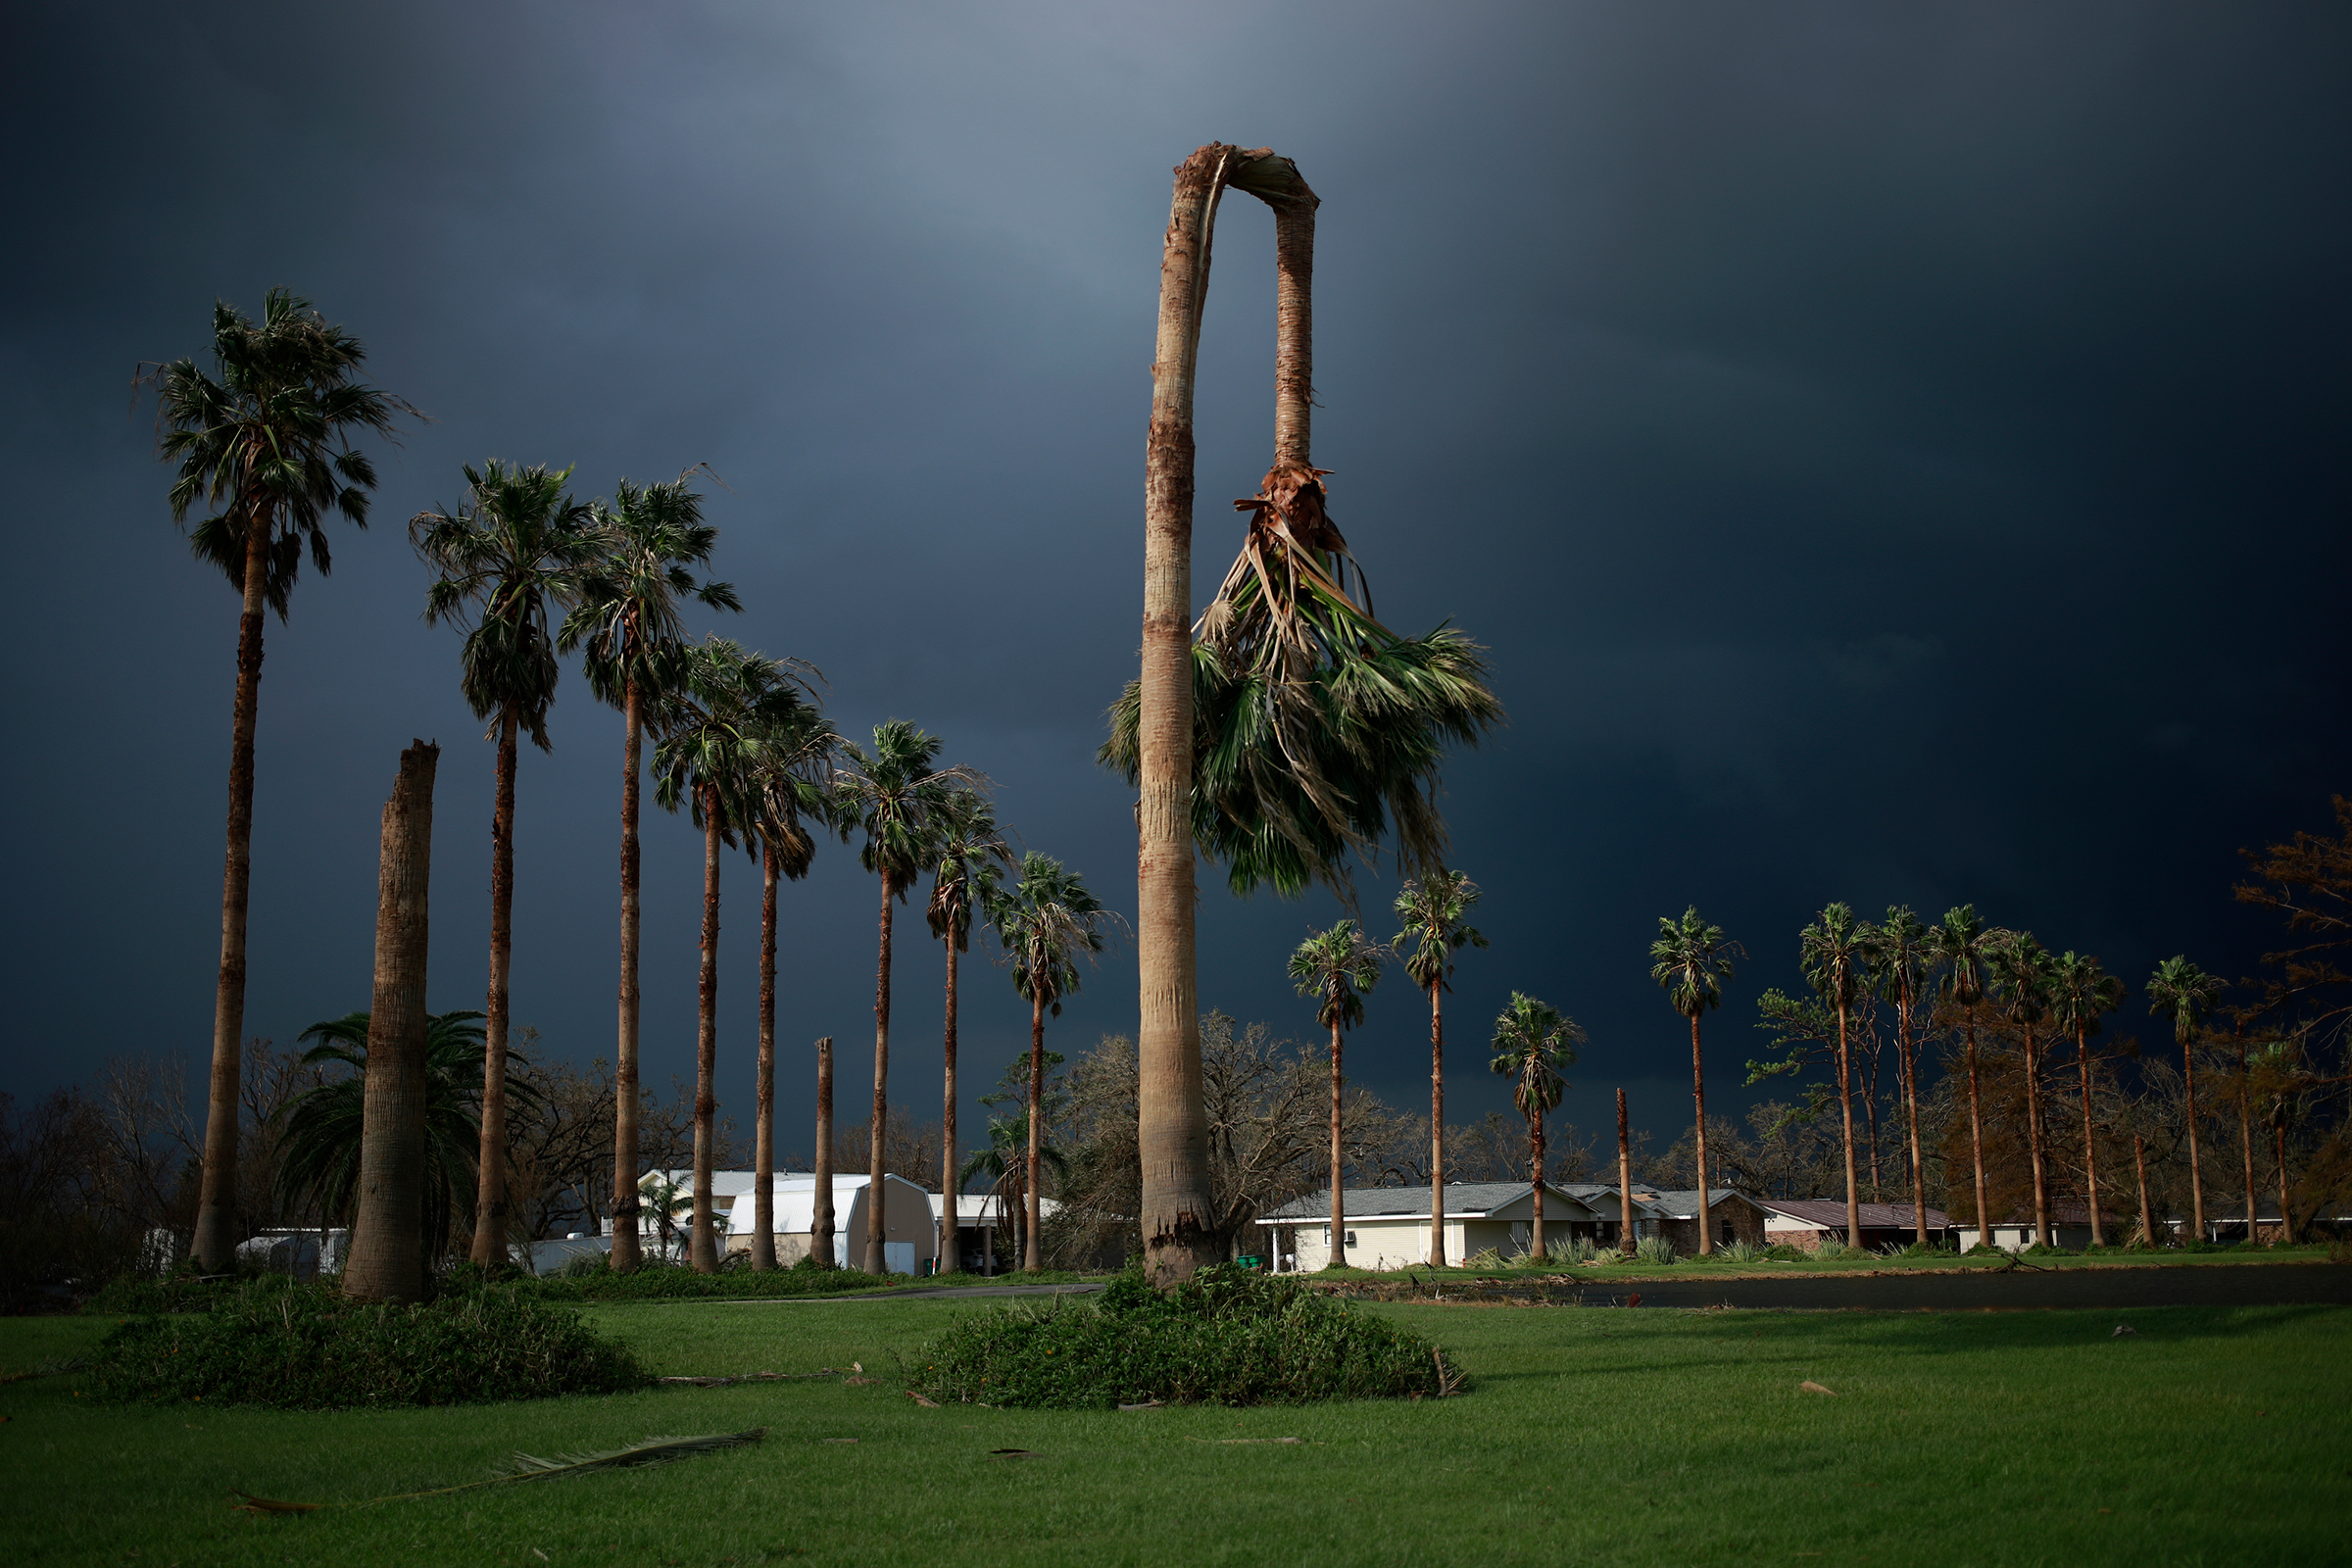 A palm tree damaged by Hurricane Ida in Galliano, La, on Aug. 31. More than a million customers in New Orleans and beyond faced an immediate future without electricity during the summer heat after Ida, one of the most powerful hurricanes to ever make landfall in Louisiana, devastated the power infrastructure.